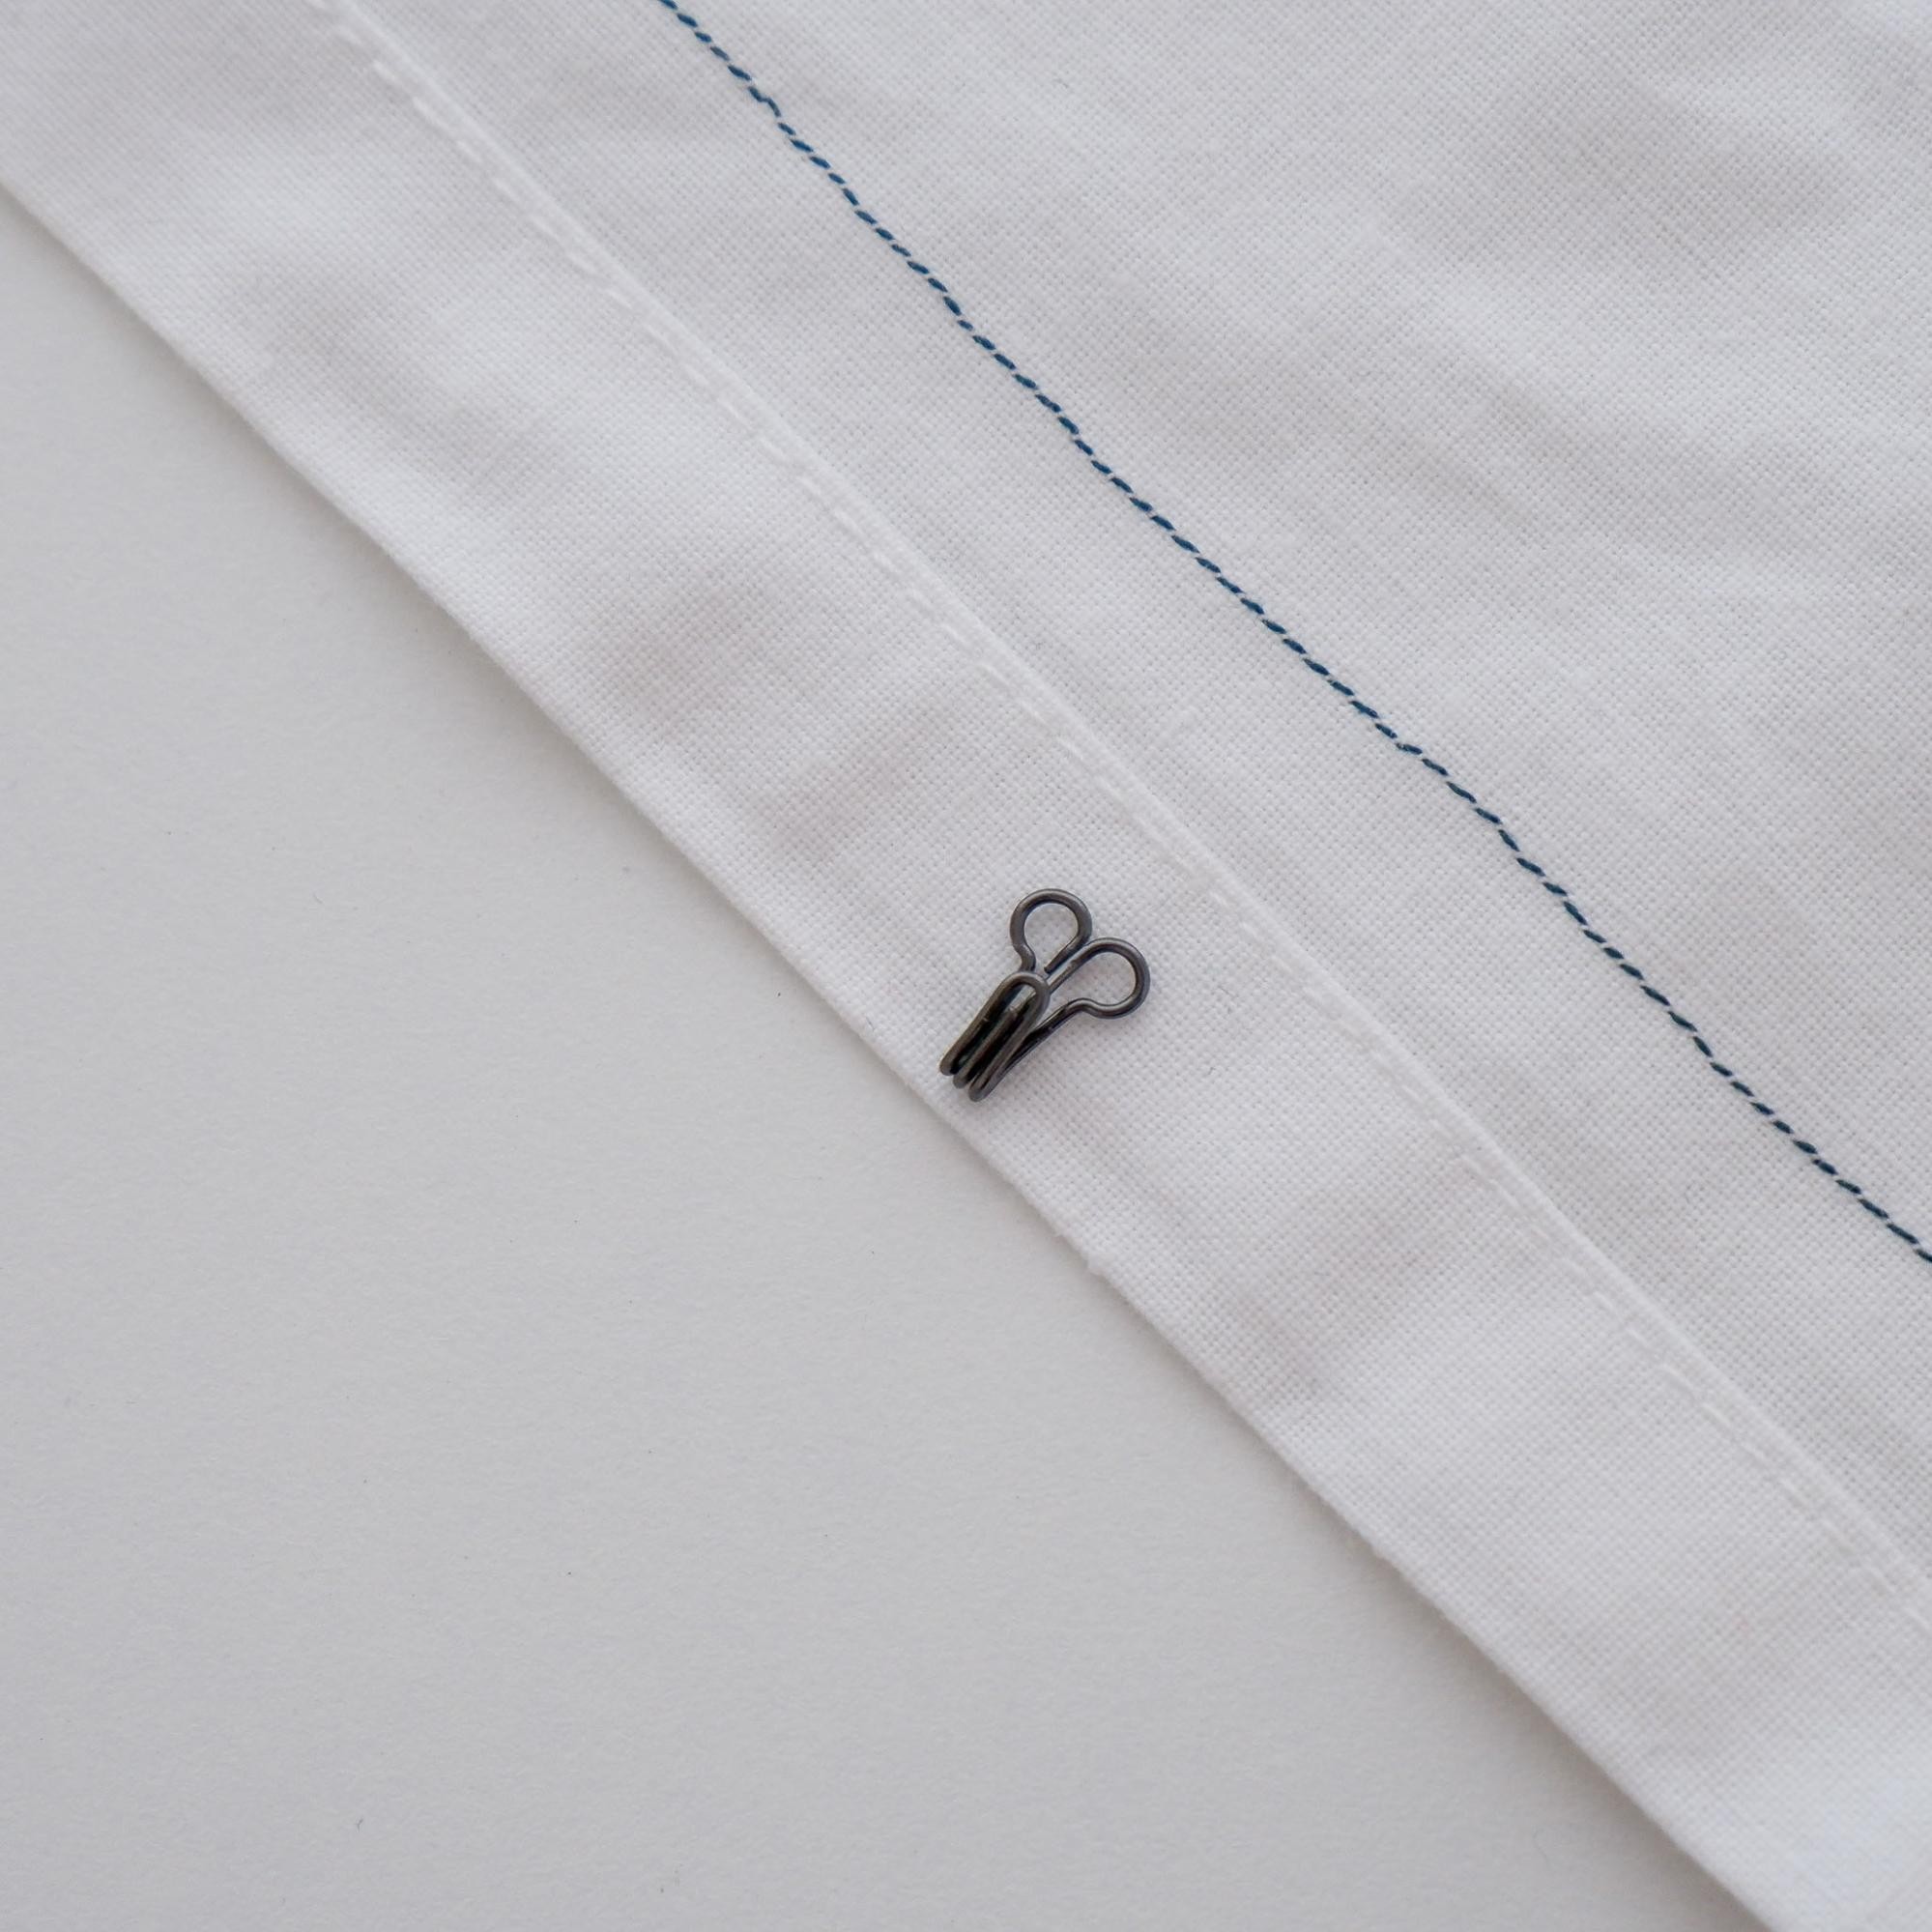 Garment with wrong side facing up and the placement of the hook about ⅛” from edge